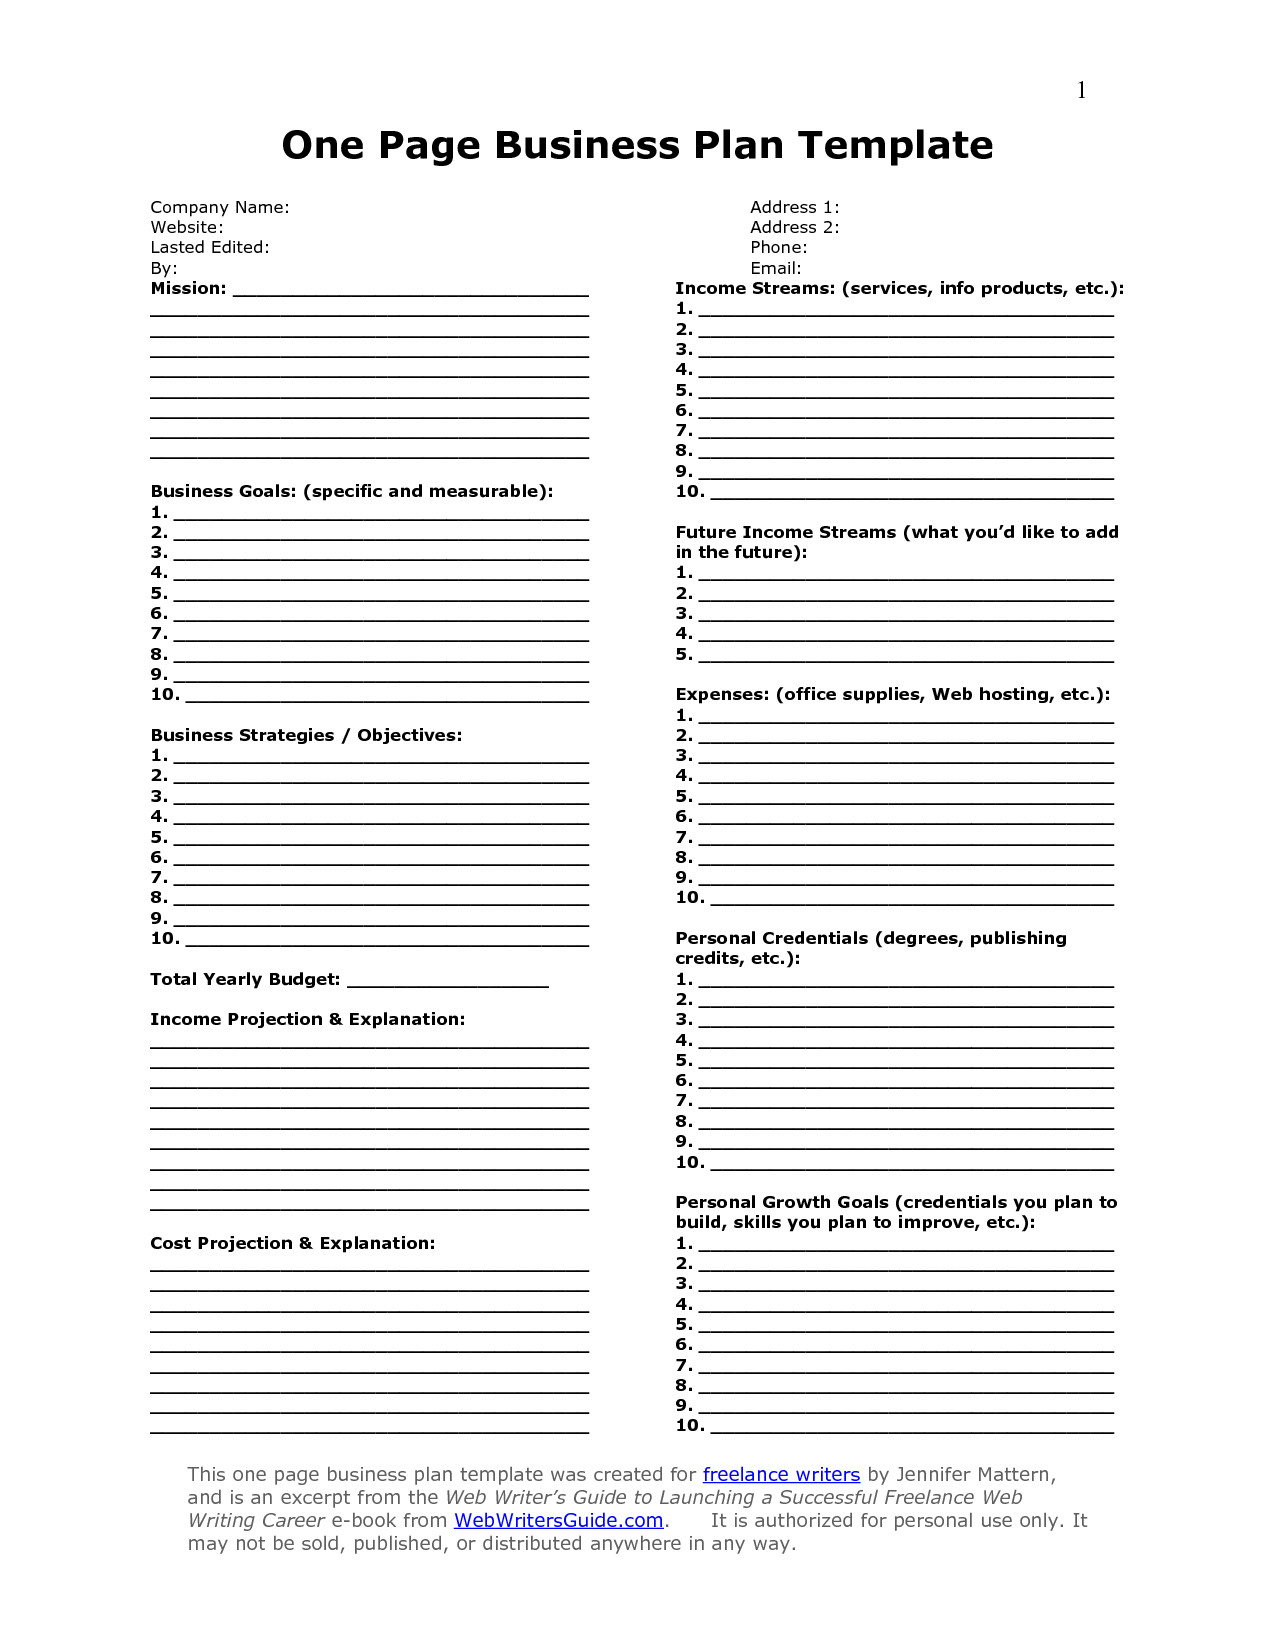 One Page Proposal Template Doc E Page Business Plan Template